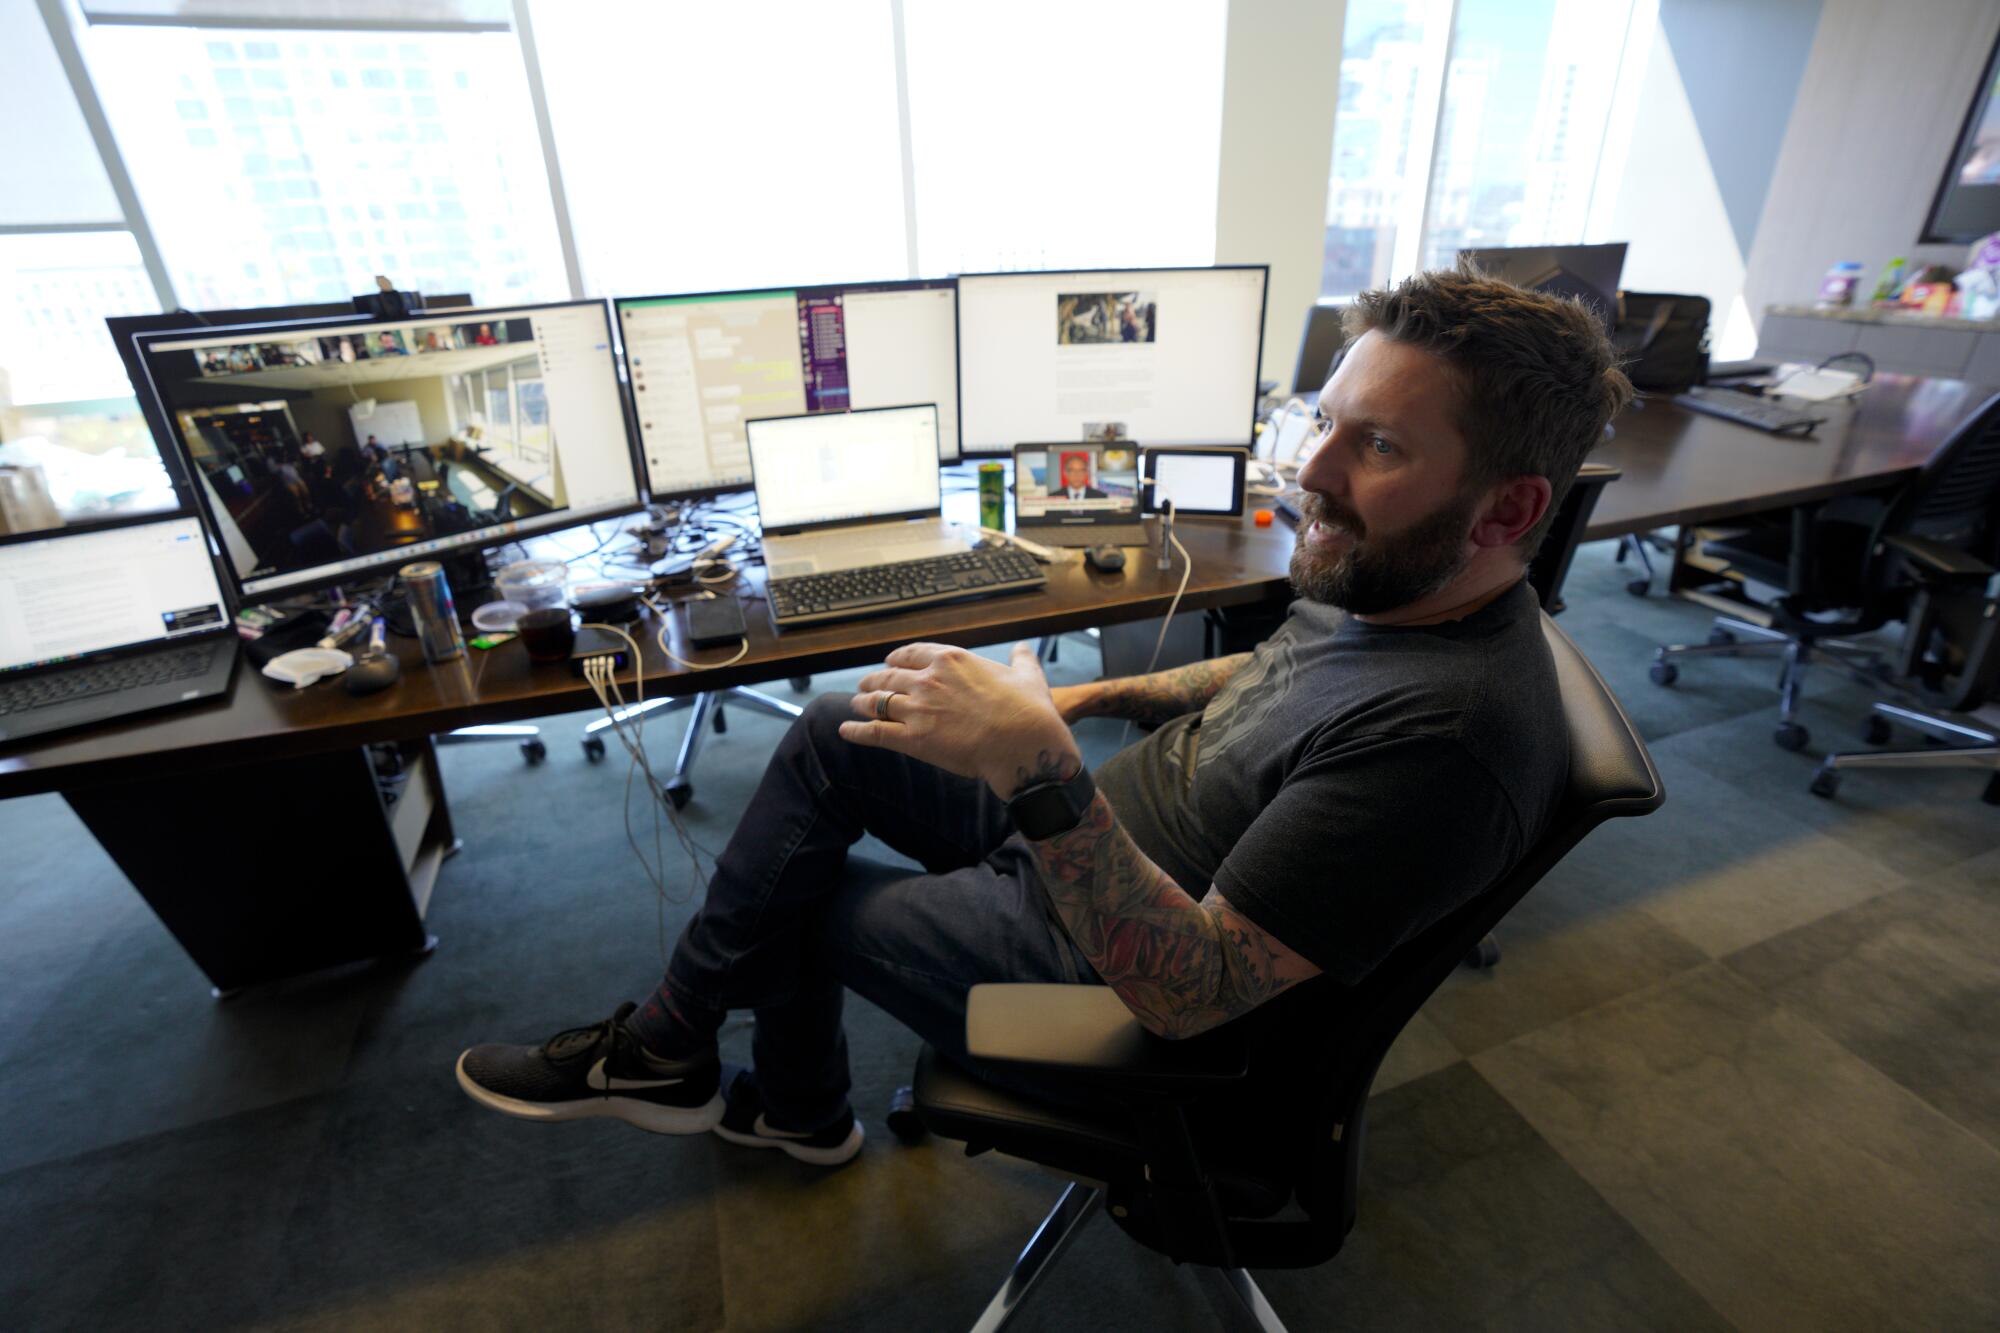 Navy veteran Shawn VanDiver sits at a desk with multiple computer screens.